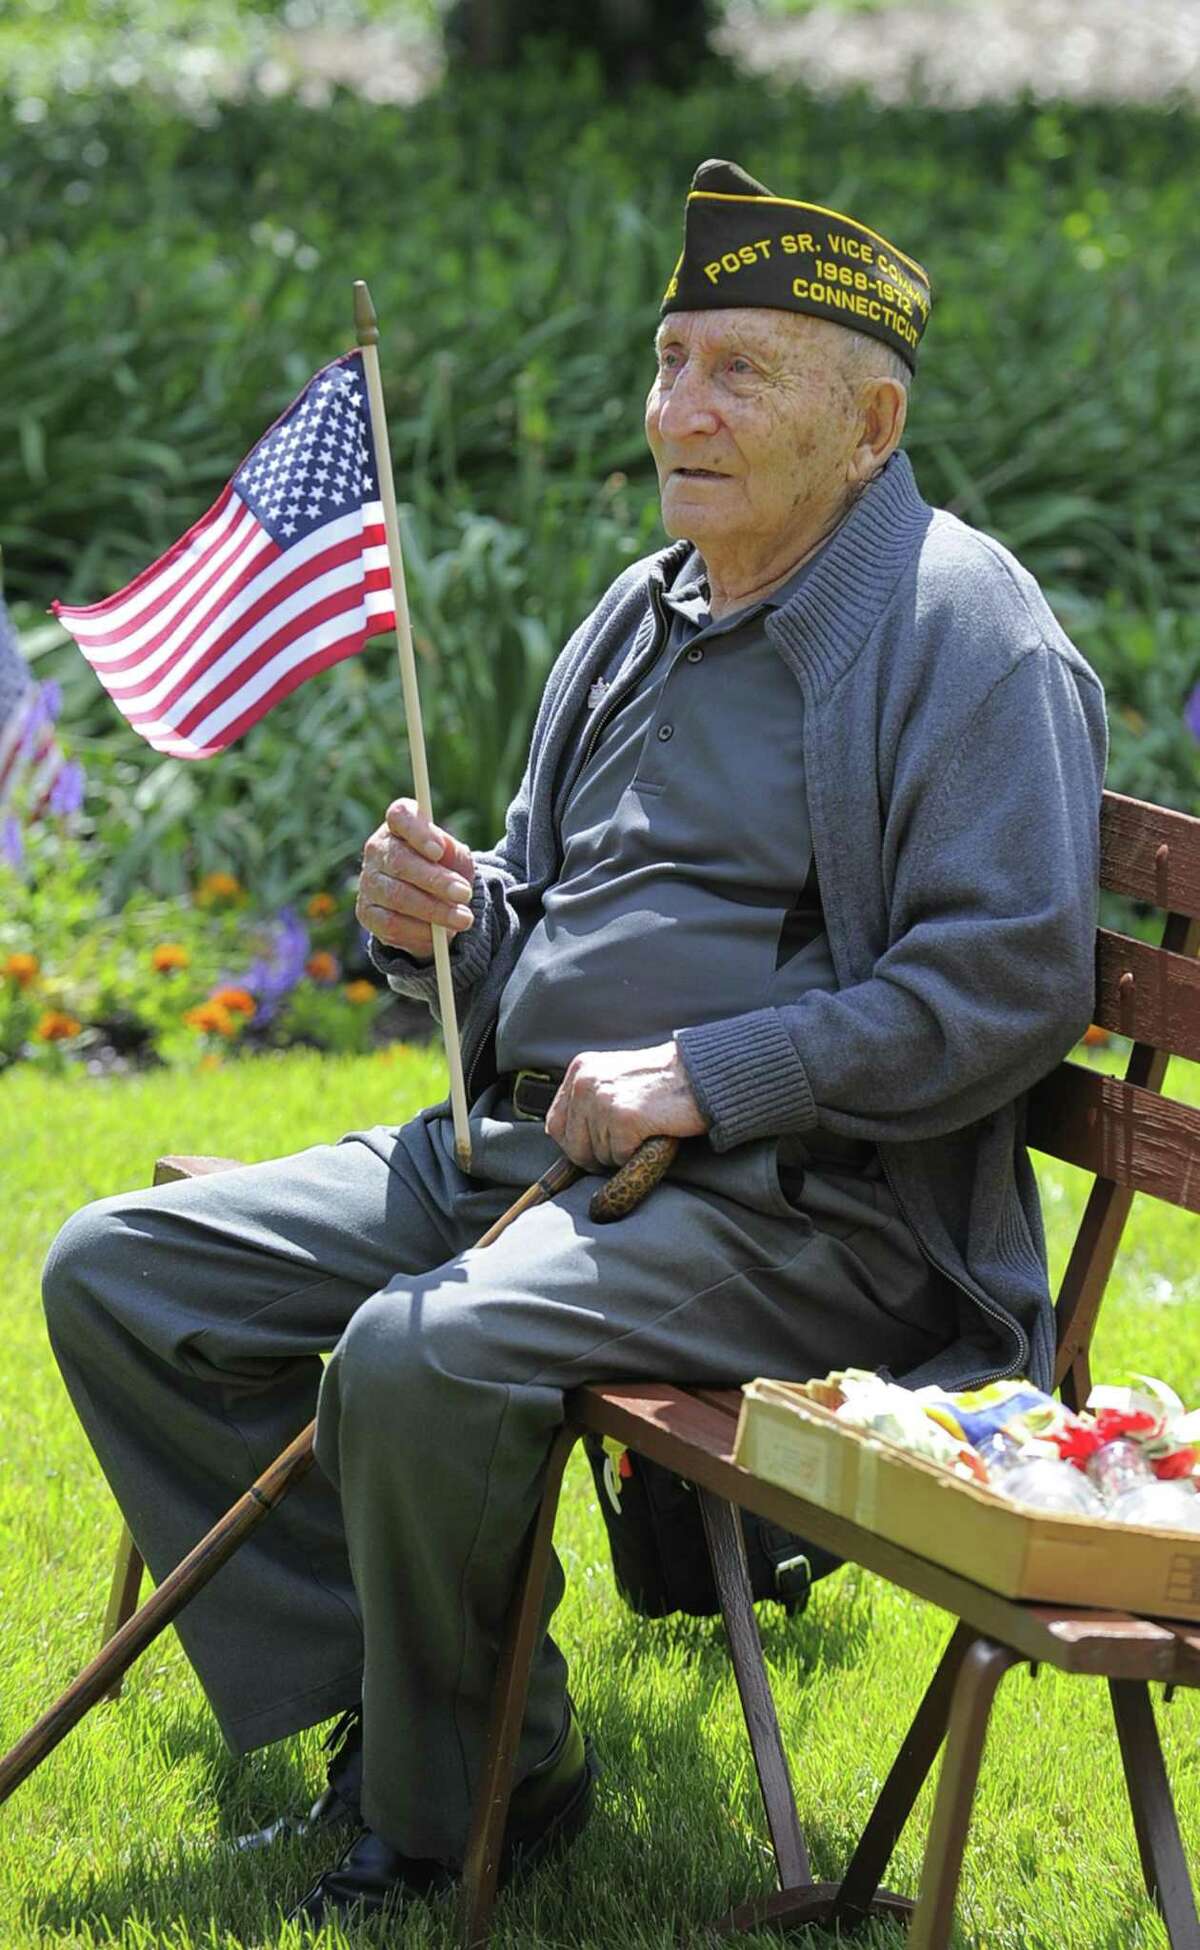 Greenwich resident Fred Intrieri, 92, who served in the Army during WWI, holds a flag during the Cos Cob VFW Post 10112 Memorial Day Ceremony to honor those who died for our country while serving in the United States Armed Services at the Cos Cob Dock VFW memorial in Greenwich, Conn. on Saturday, May 27, 2017.